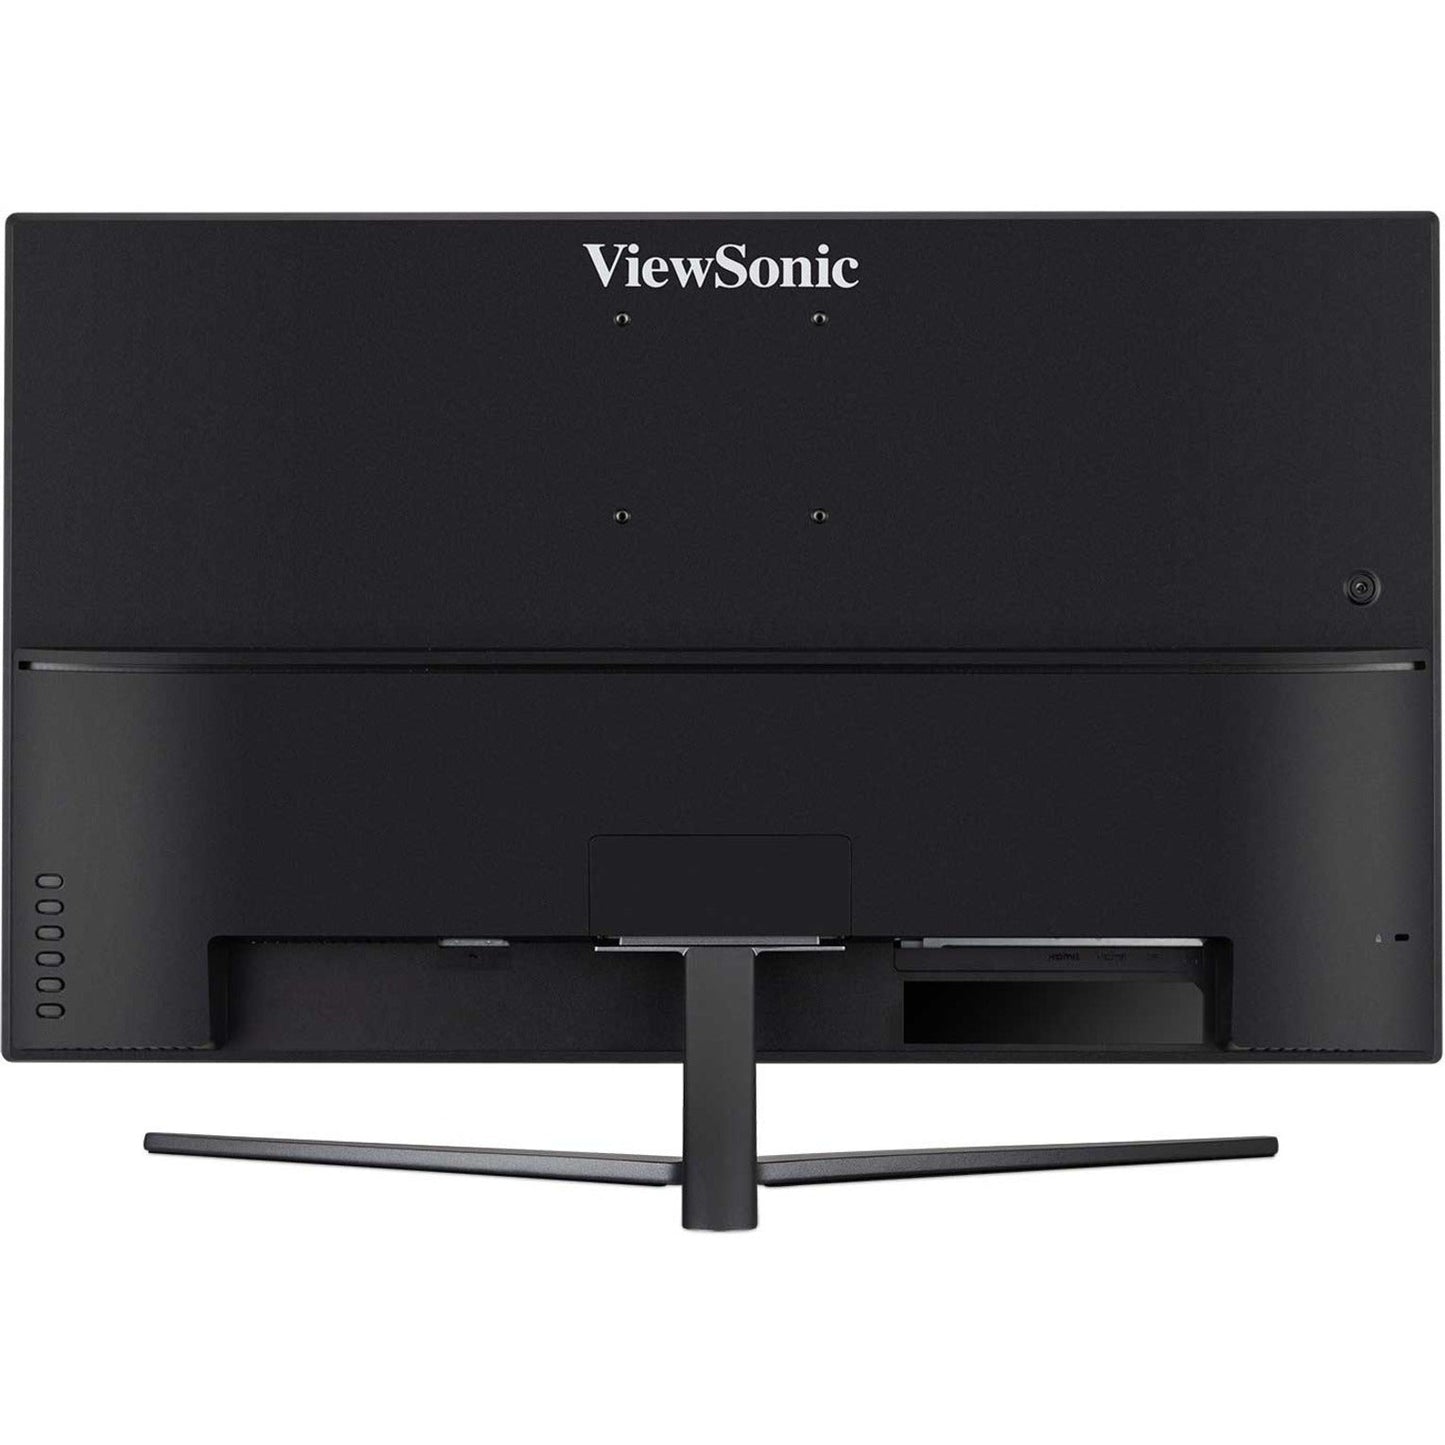 ViewSonic VX3211-4K-MHD 32 Inch 4K UHD Monitor with 99% sRGB Color Coverage HDR10 FreeSync HDMI and DisplayPort